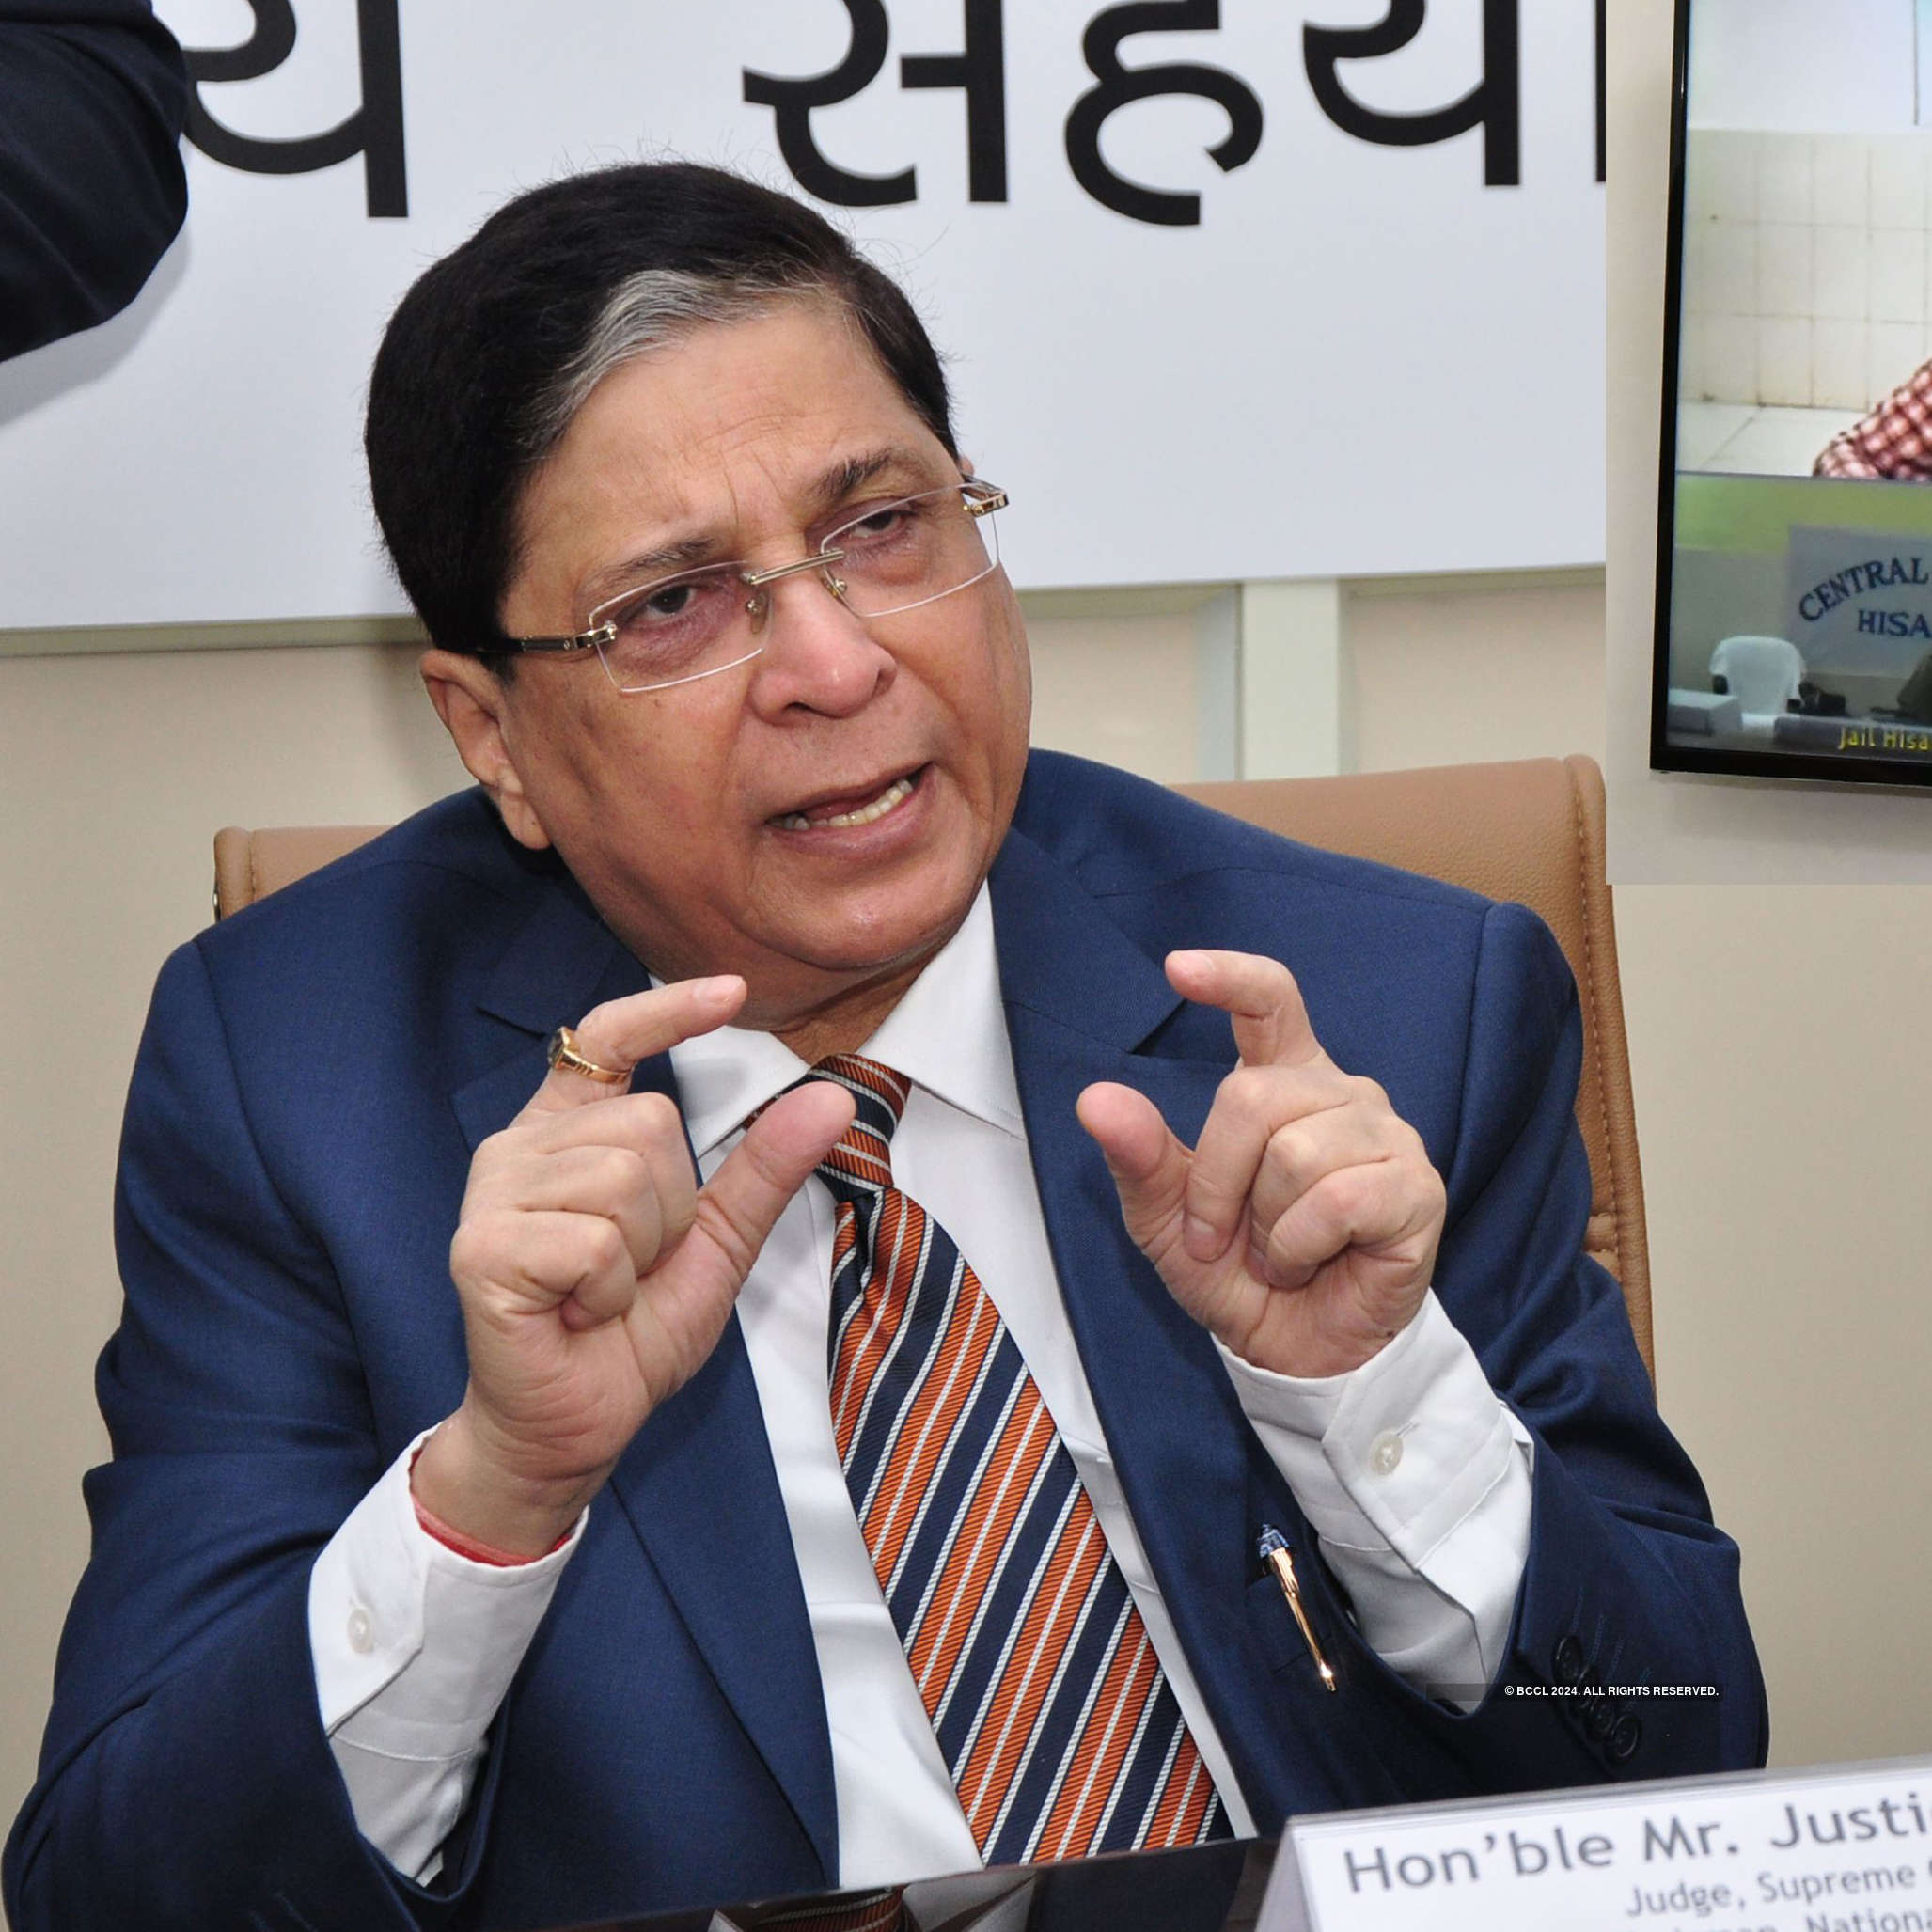 Congress-led opposition submits impeachment notice against CJI Dipak Misra